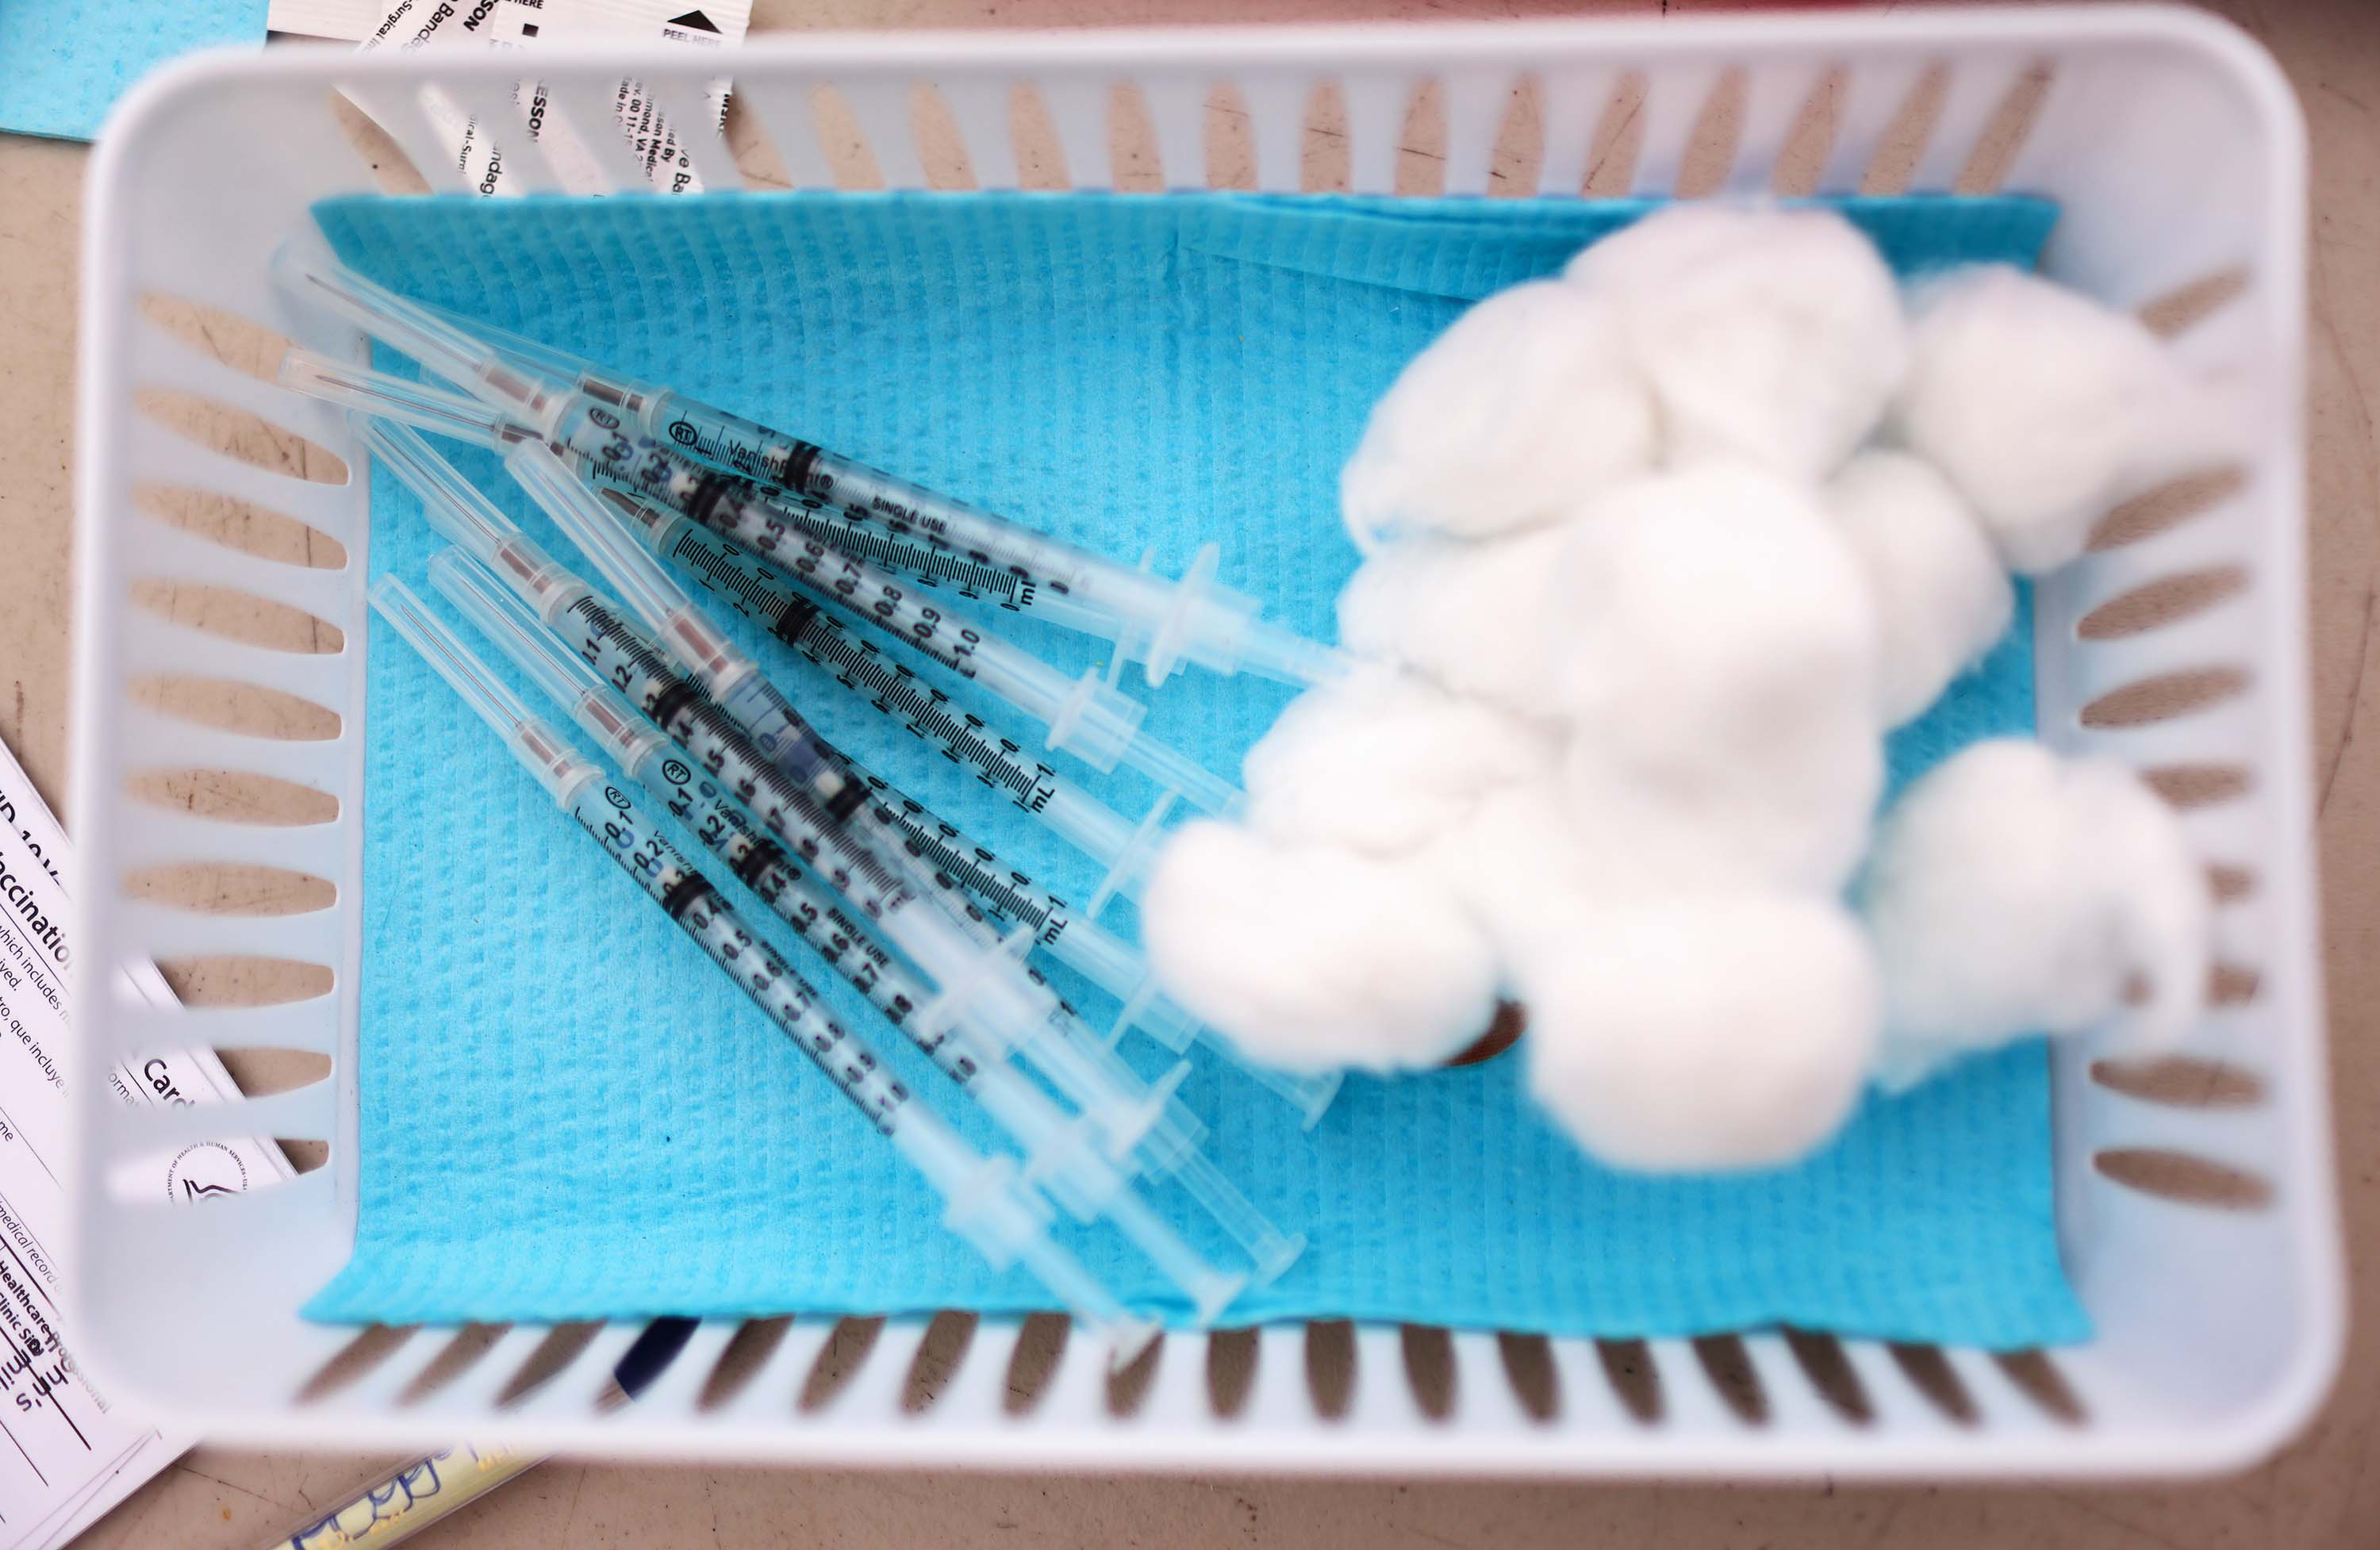 Syringes containing a dose of the Pfizer Covid-19 vaccine are seen at a clinic in Los Angeles, California, on April 10.